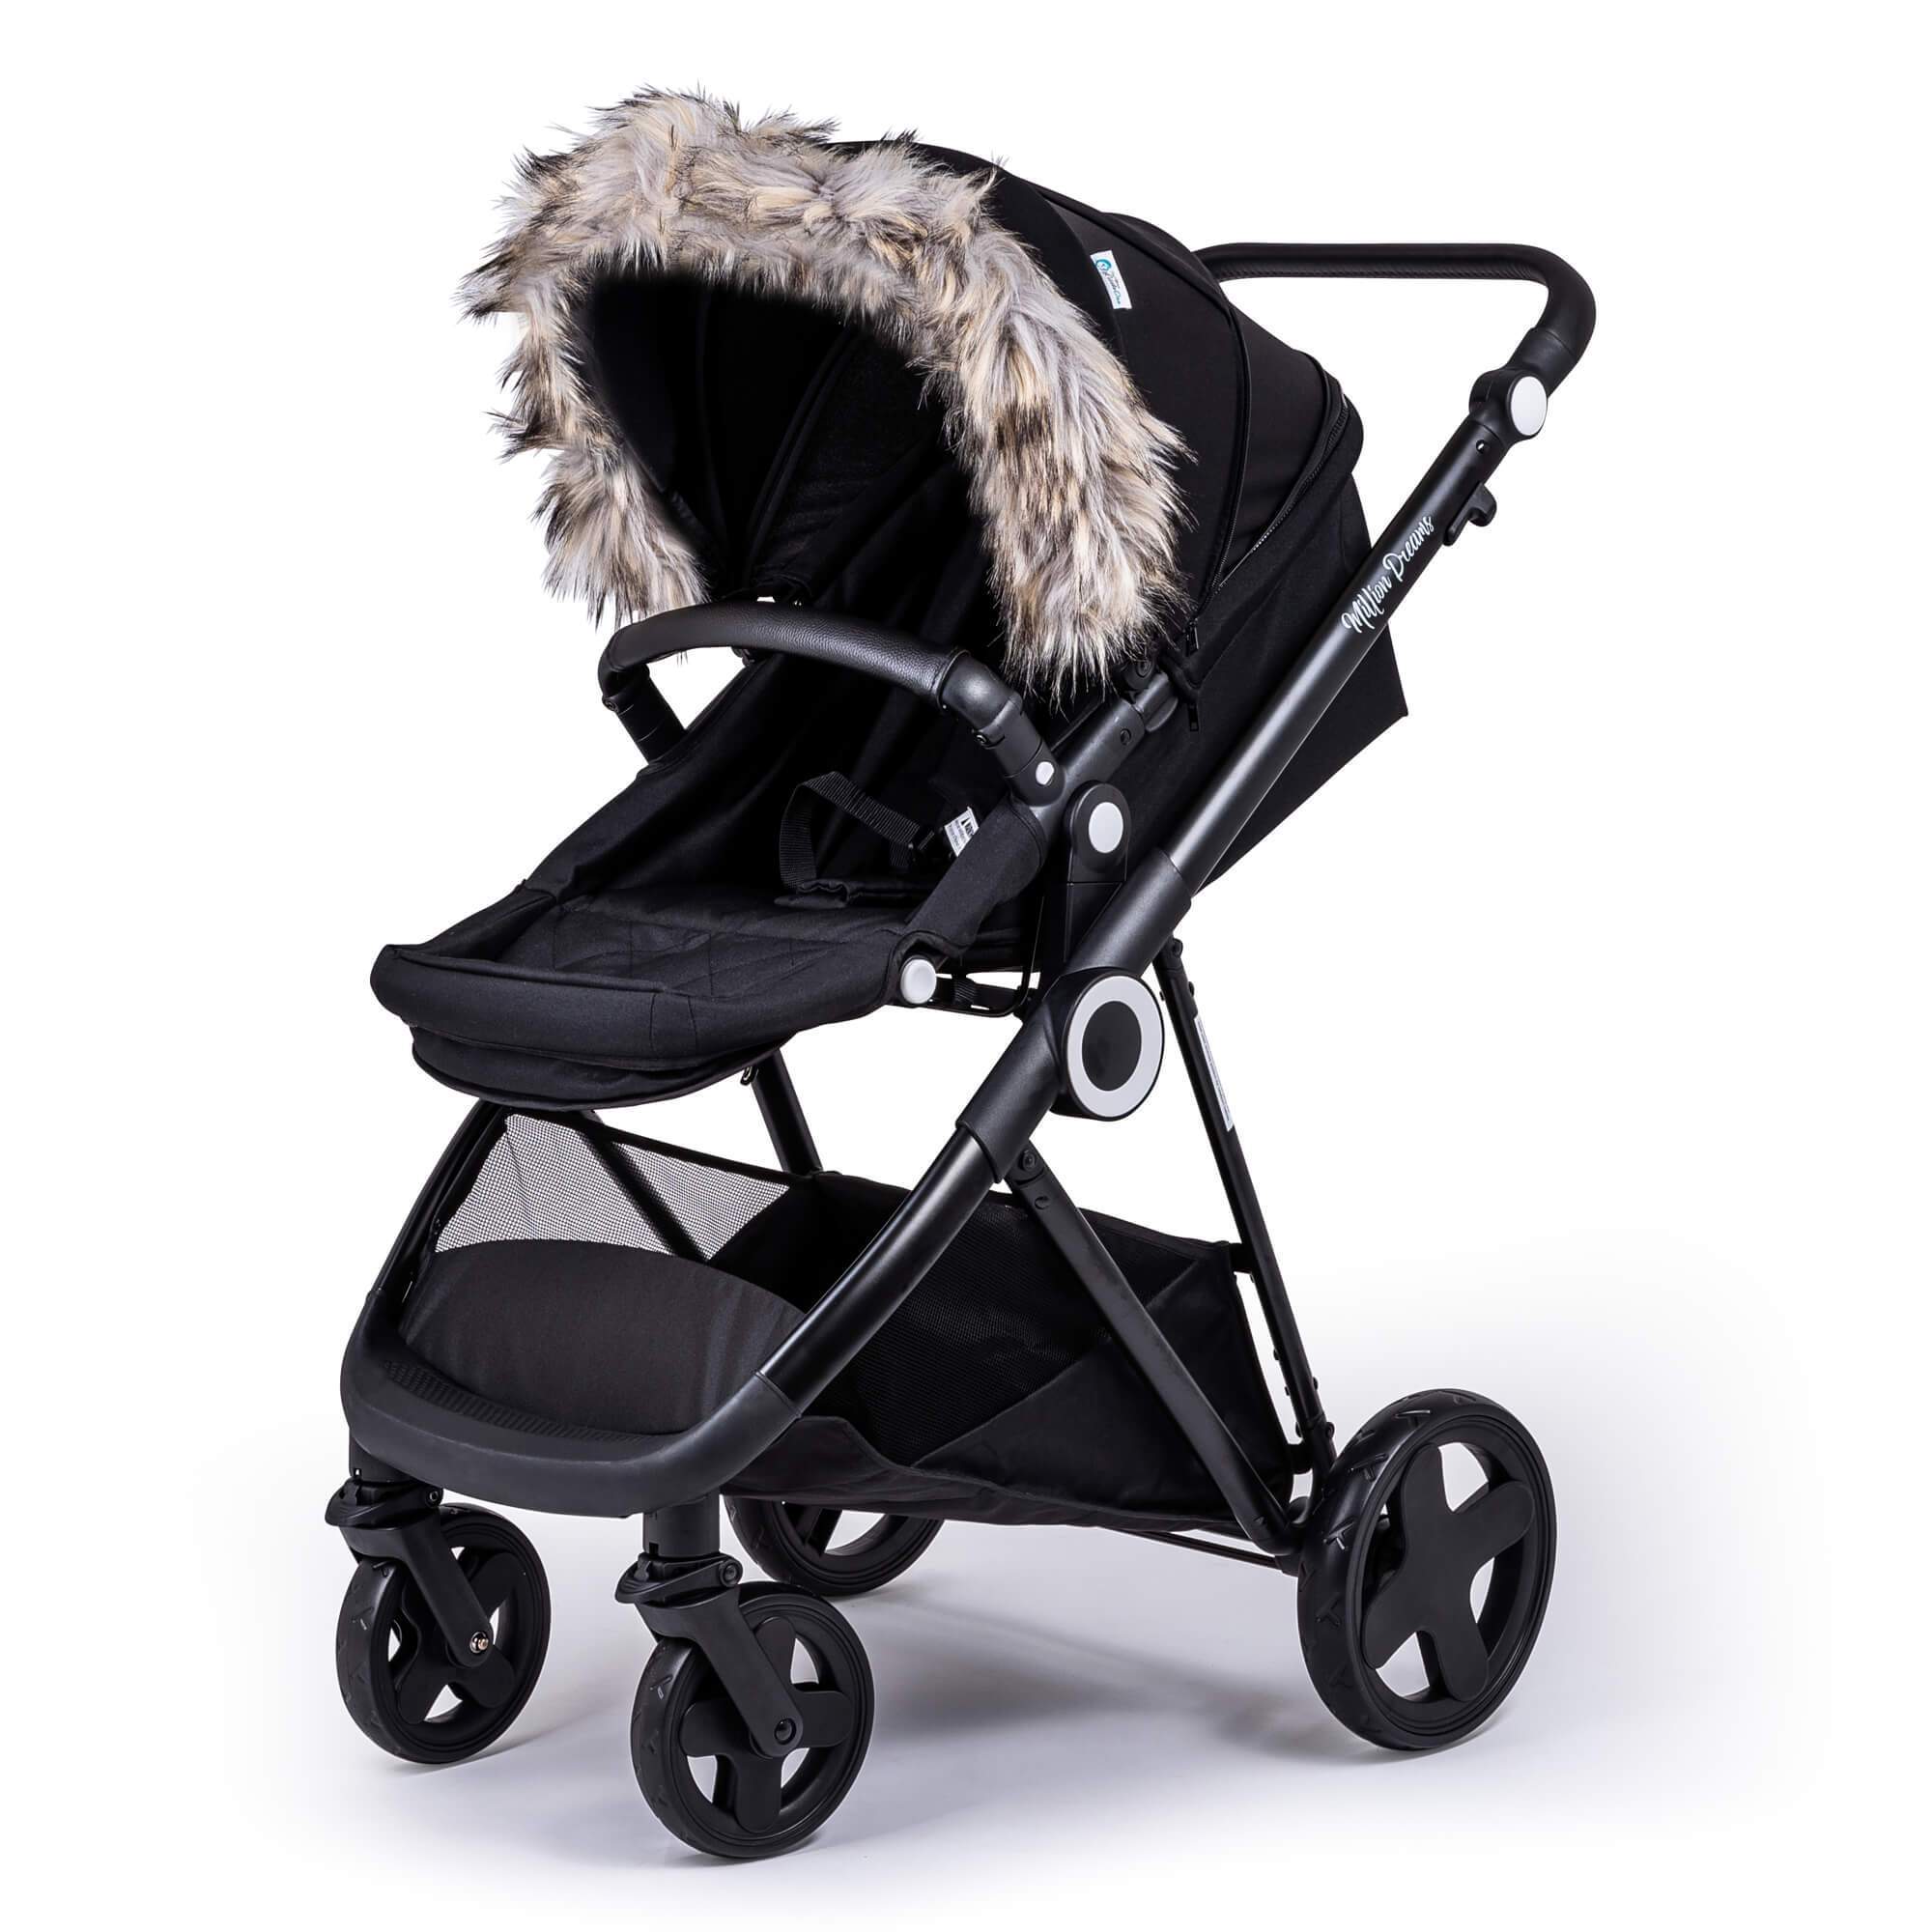 Pram Fur Hood Trim Attachment for Pushchair Compatible with Maclaren - Light Grey / Fits All Models | For Your Little One